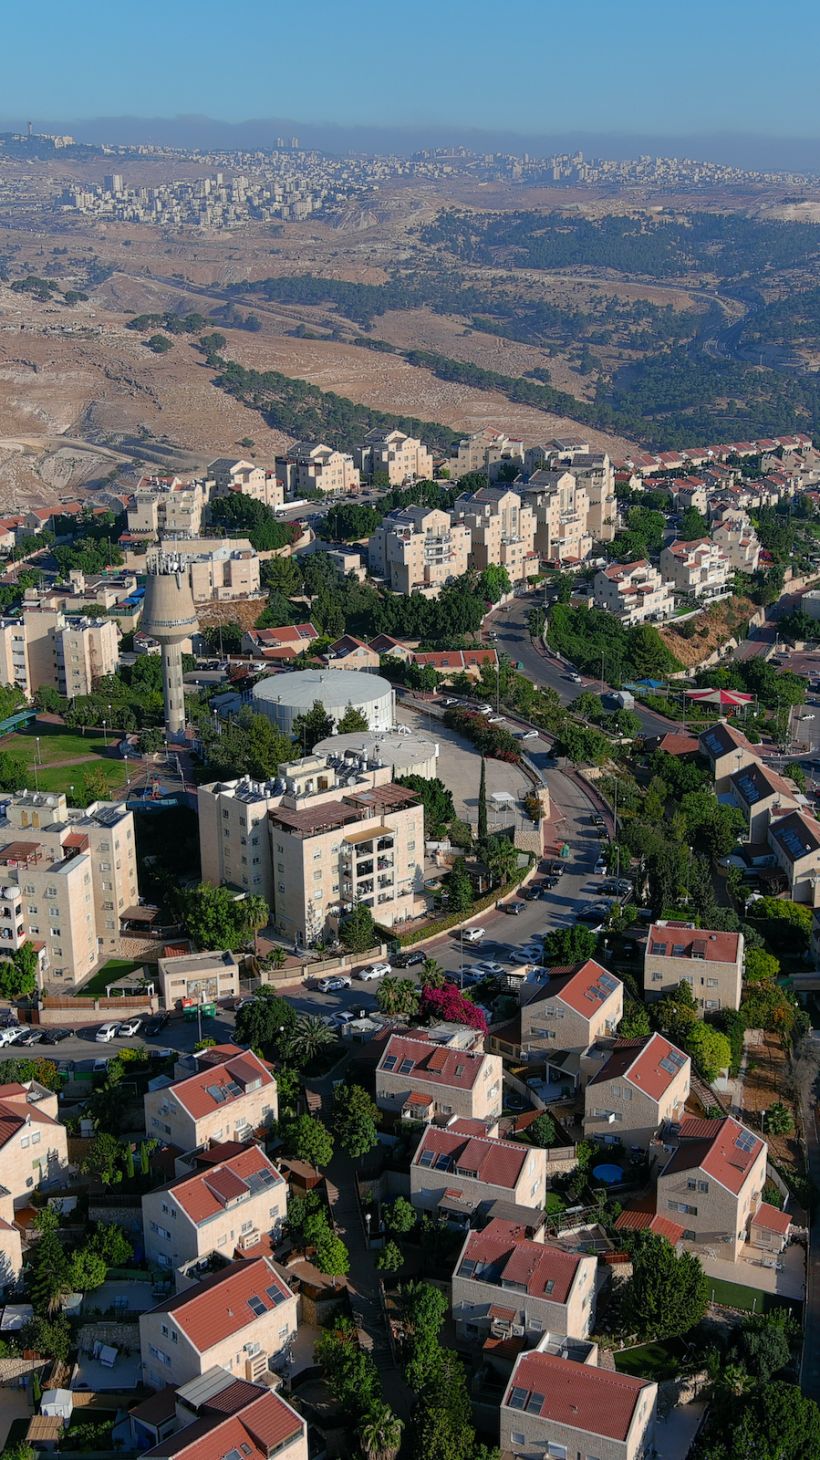 An aerial view shows the Jewish settlement of Maale Adumim in the Israeli-occupied West Bank, June 29, 2020. [Ilan Rosenberg/REUTERS]